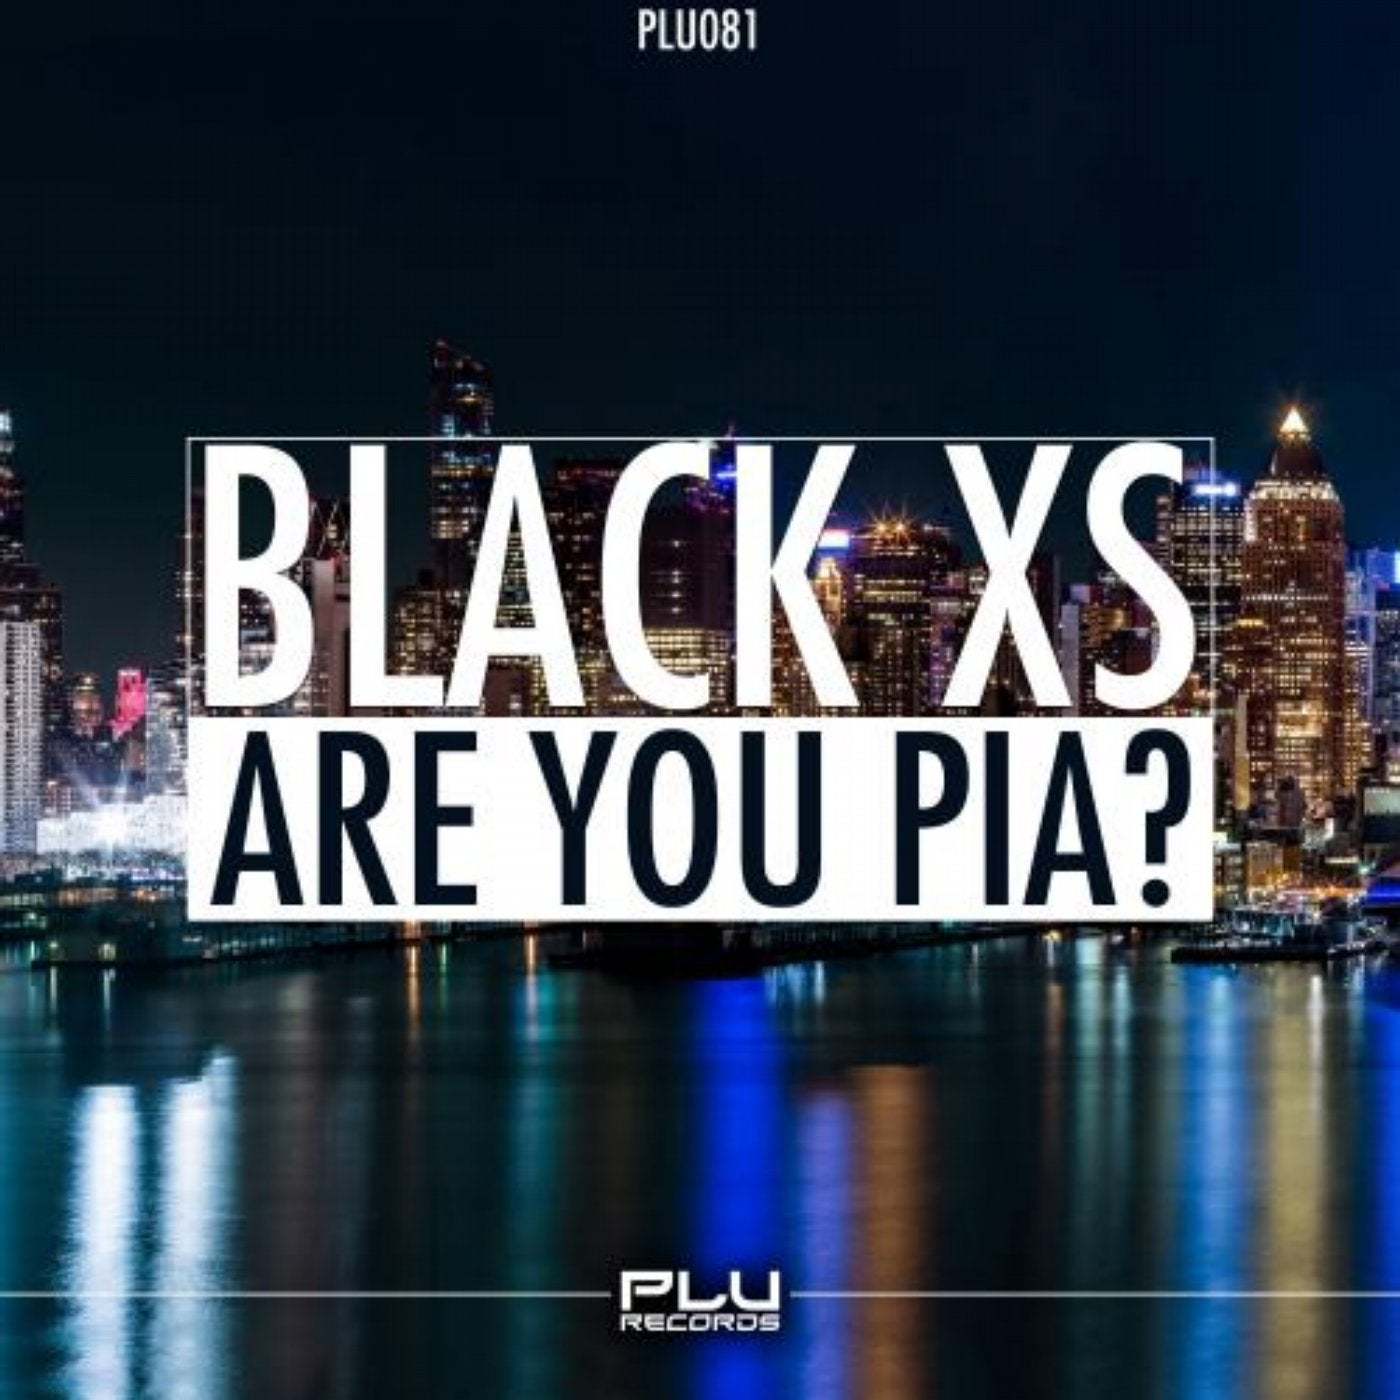 Are You Pia?